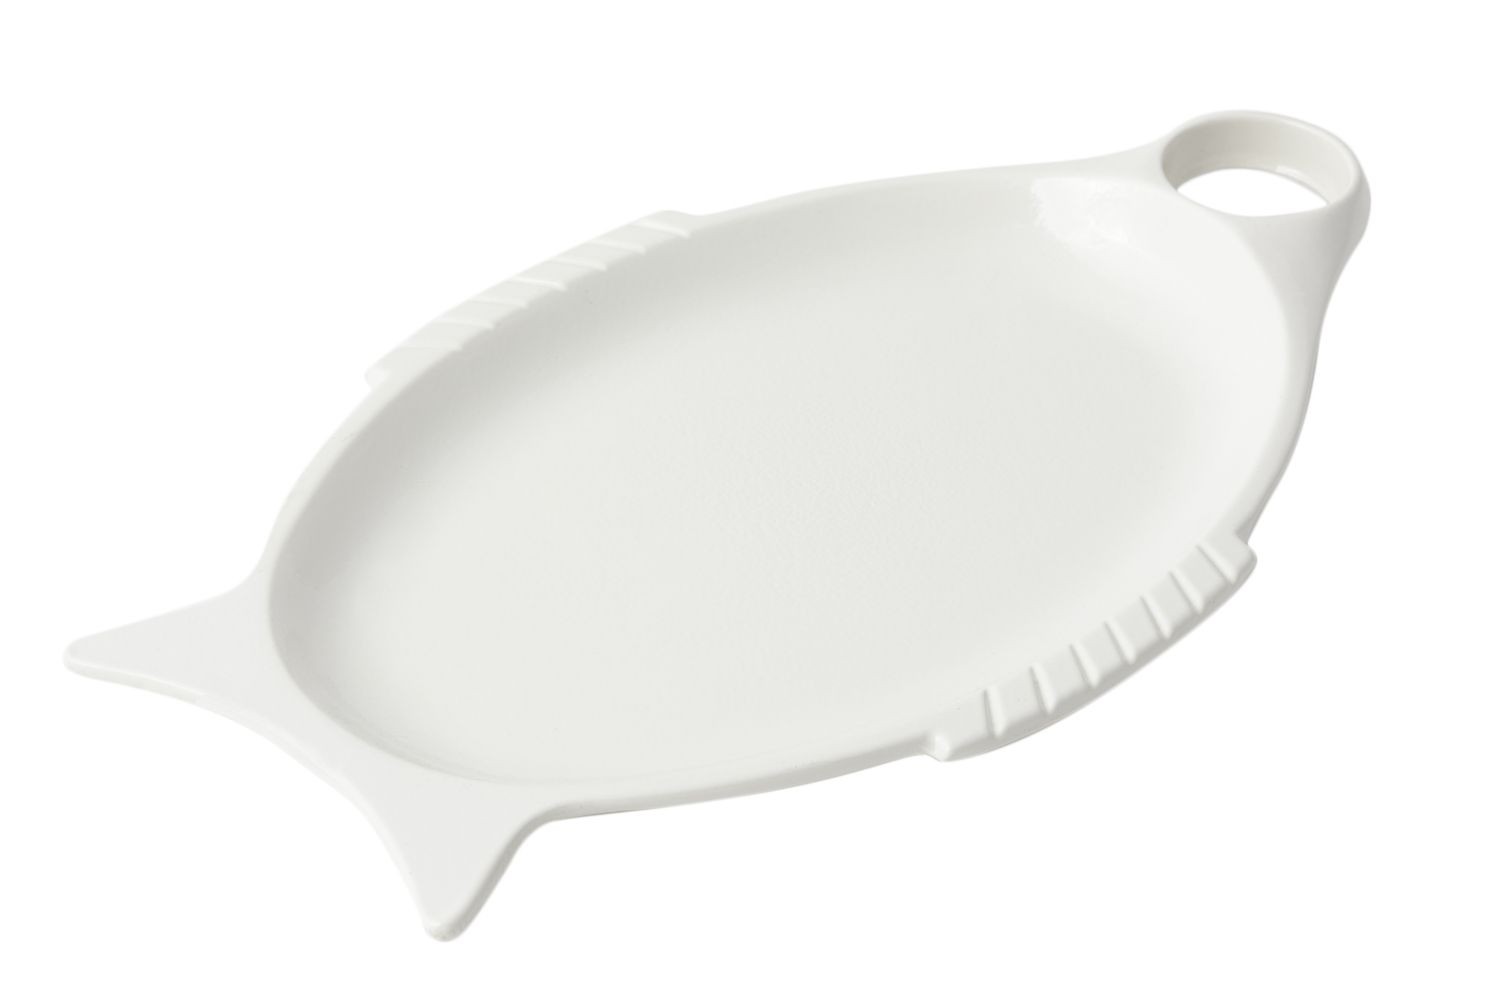 Bon Chef 2035S Fish-Shaped Platter with Cup Holder, Sandstone 8 1/2" x 14 1/2", Set of 6